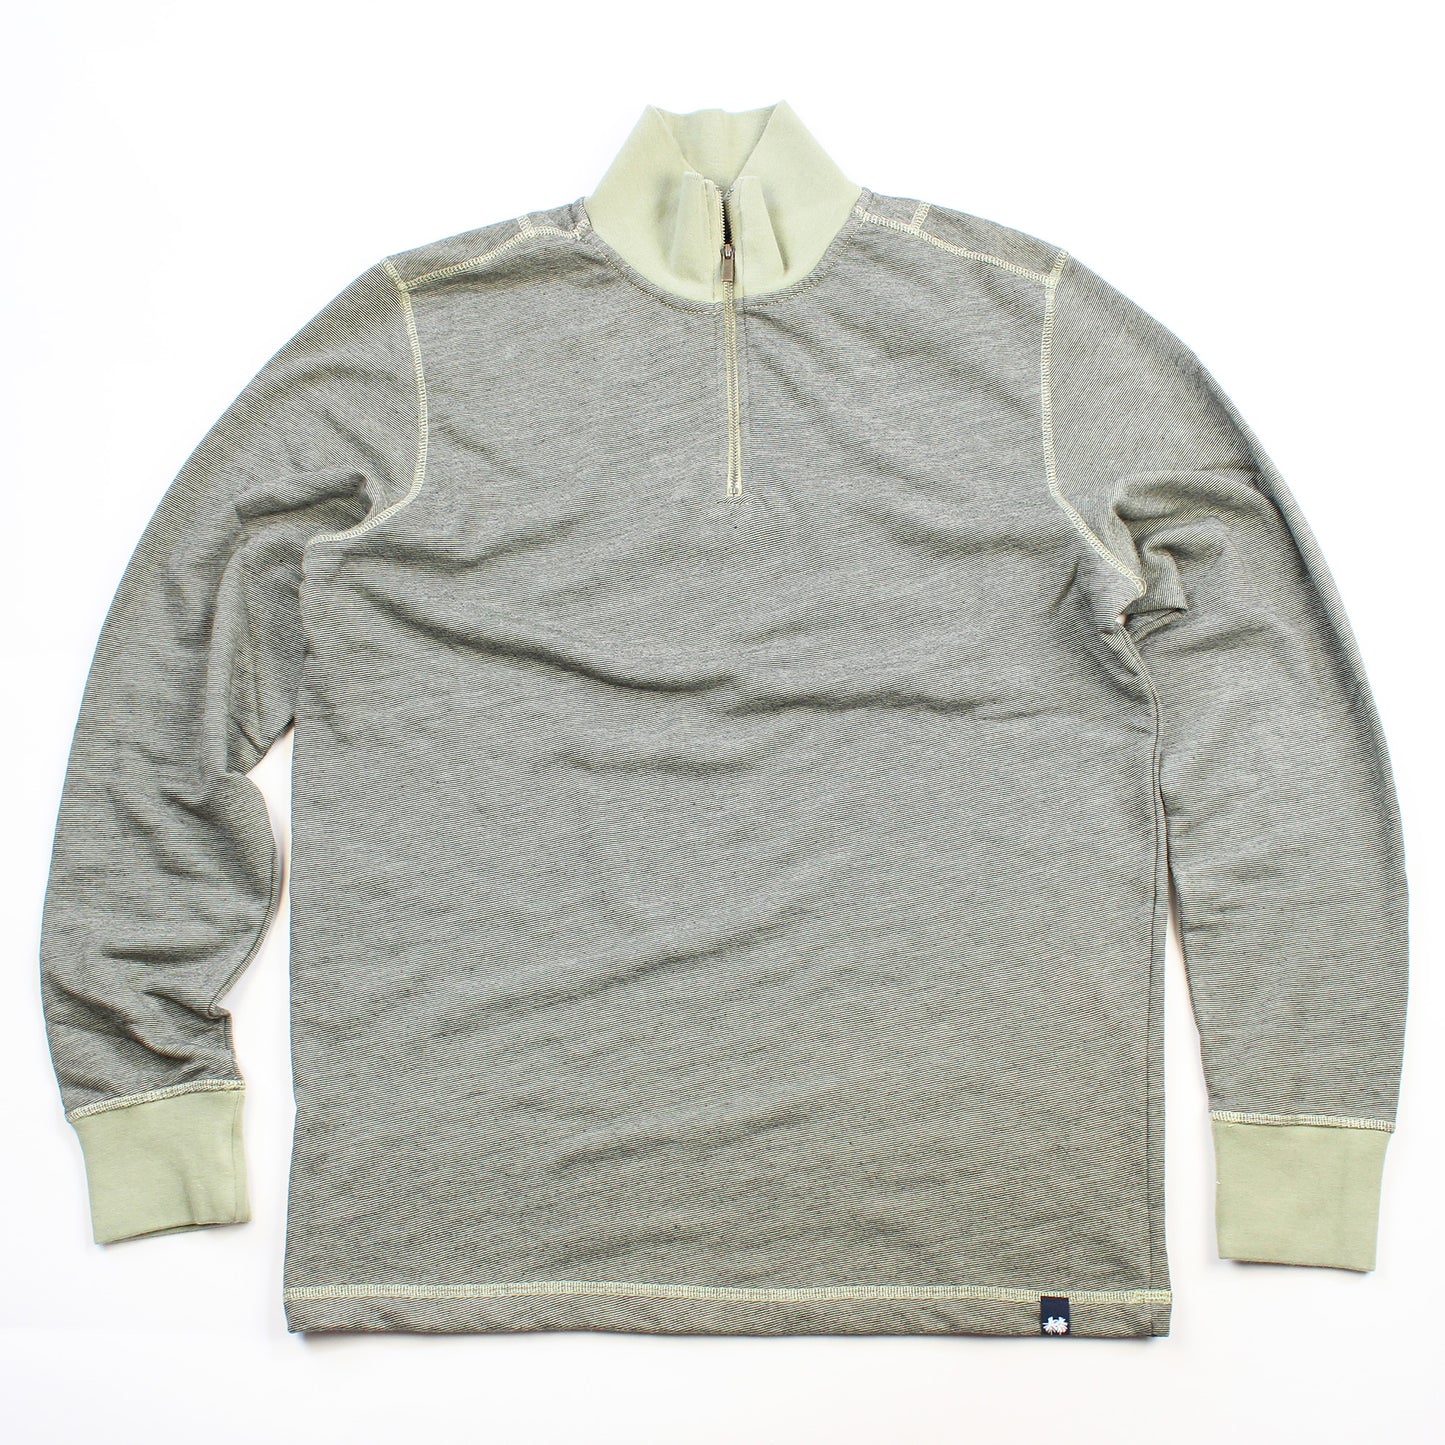 Cypress French Terry 1/4 Zip